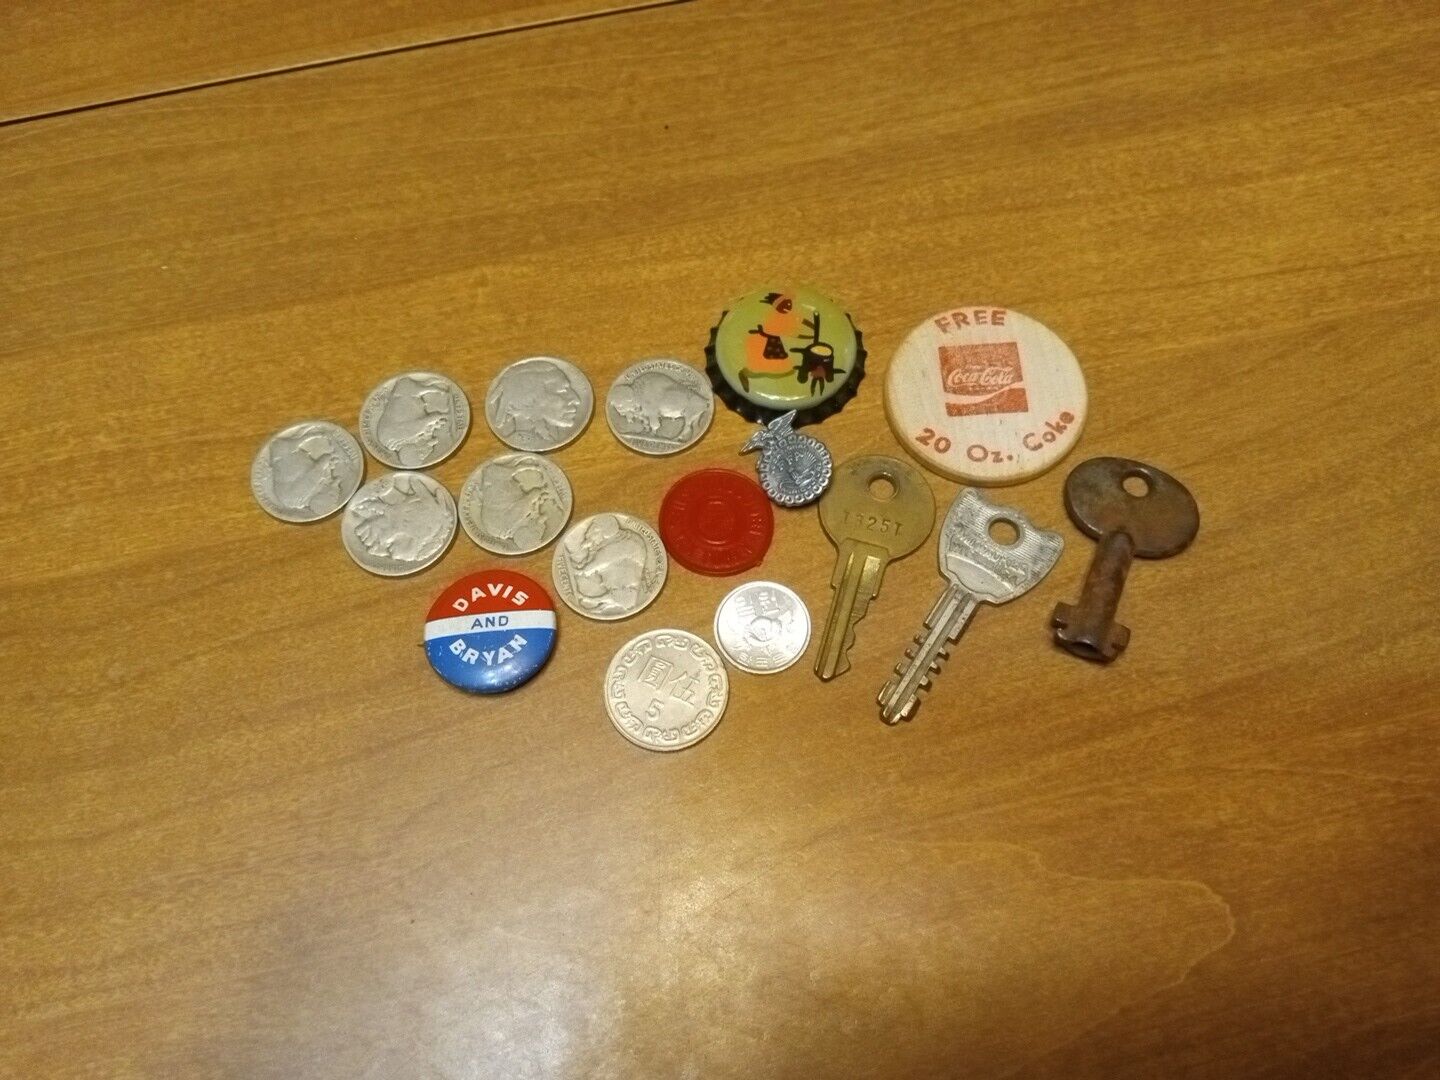 Junk Drawer Vintage Collectables Lot Of 17 Coins, Tokens, Keys, Pins Rare Unique